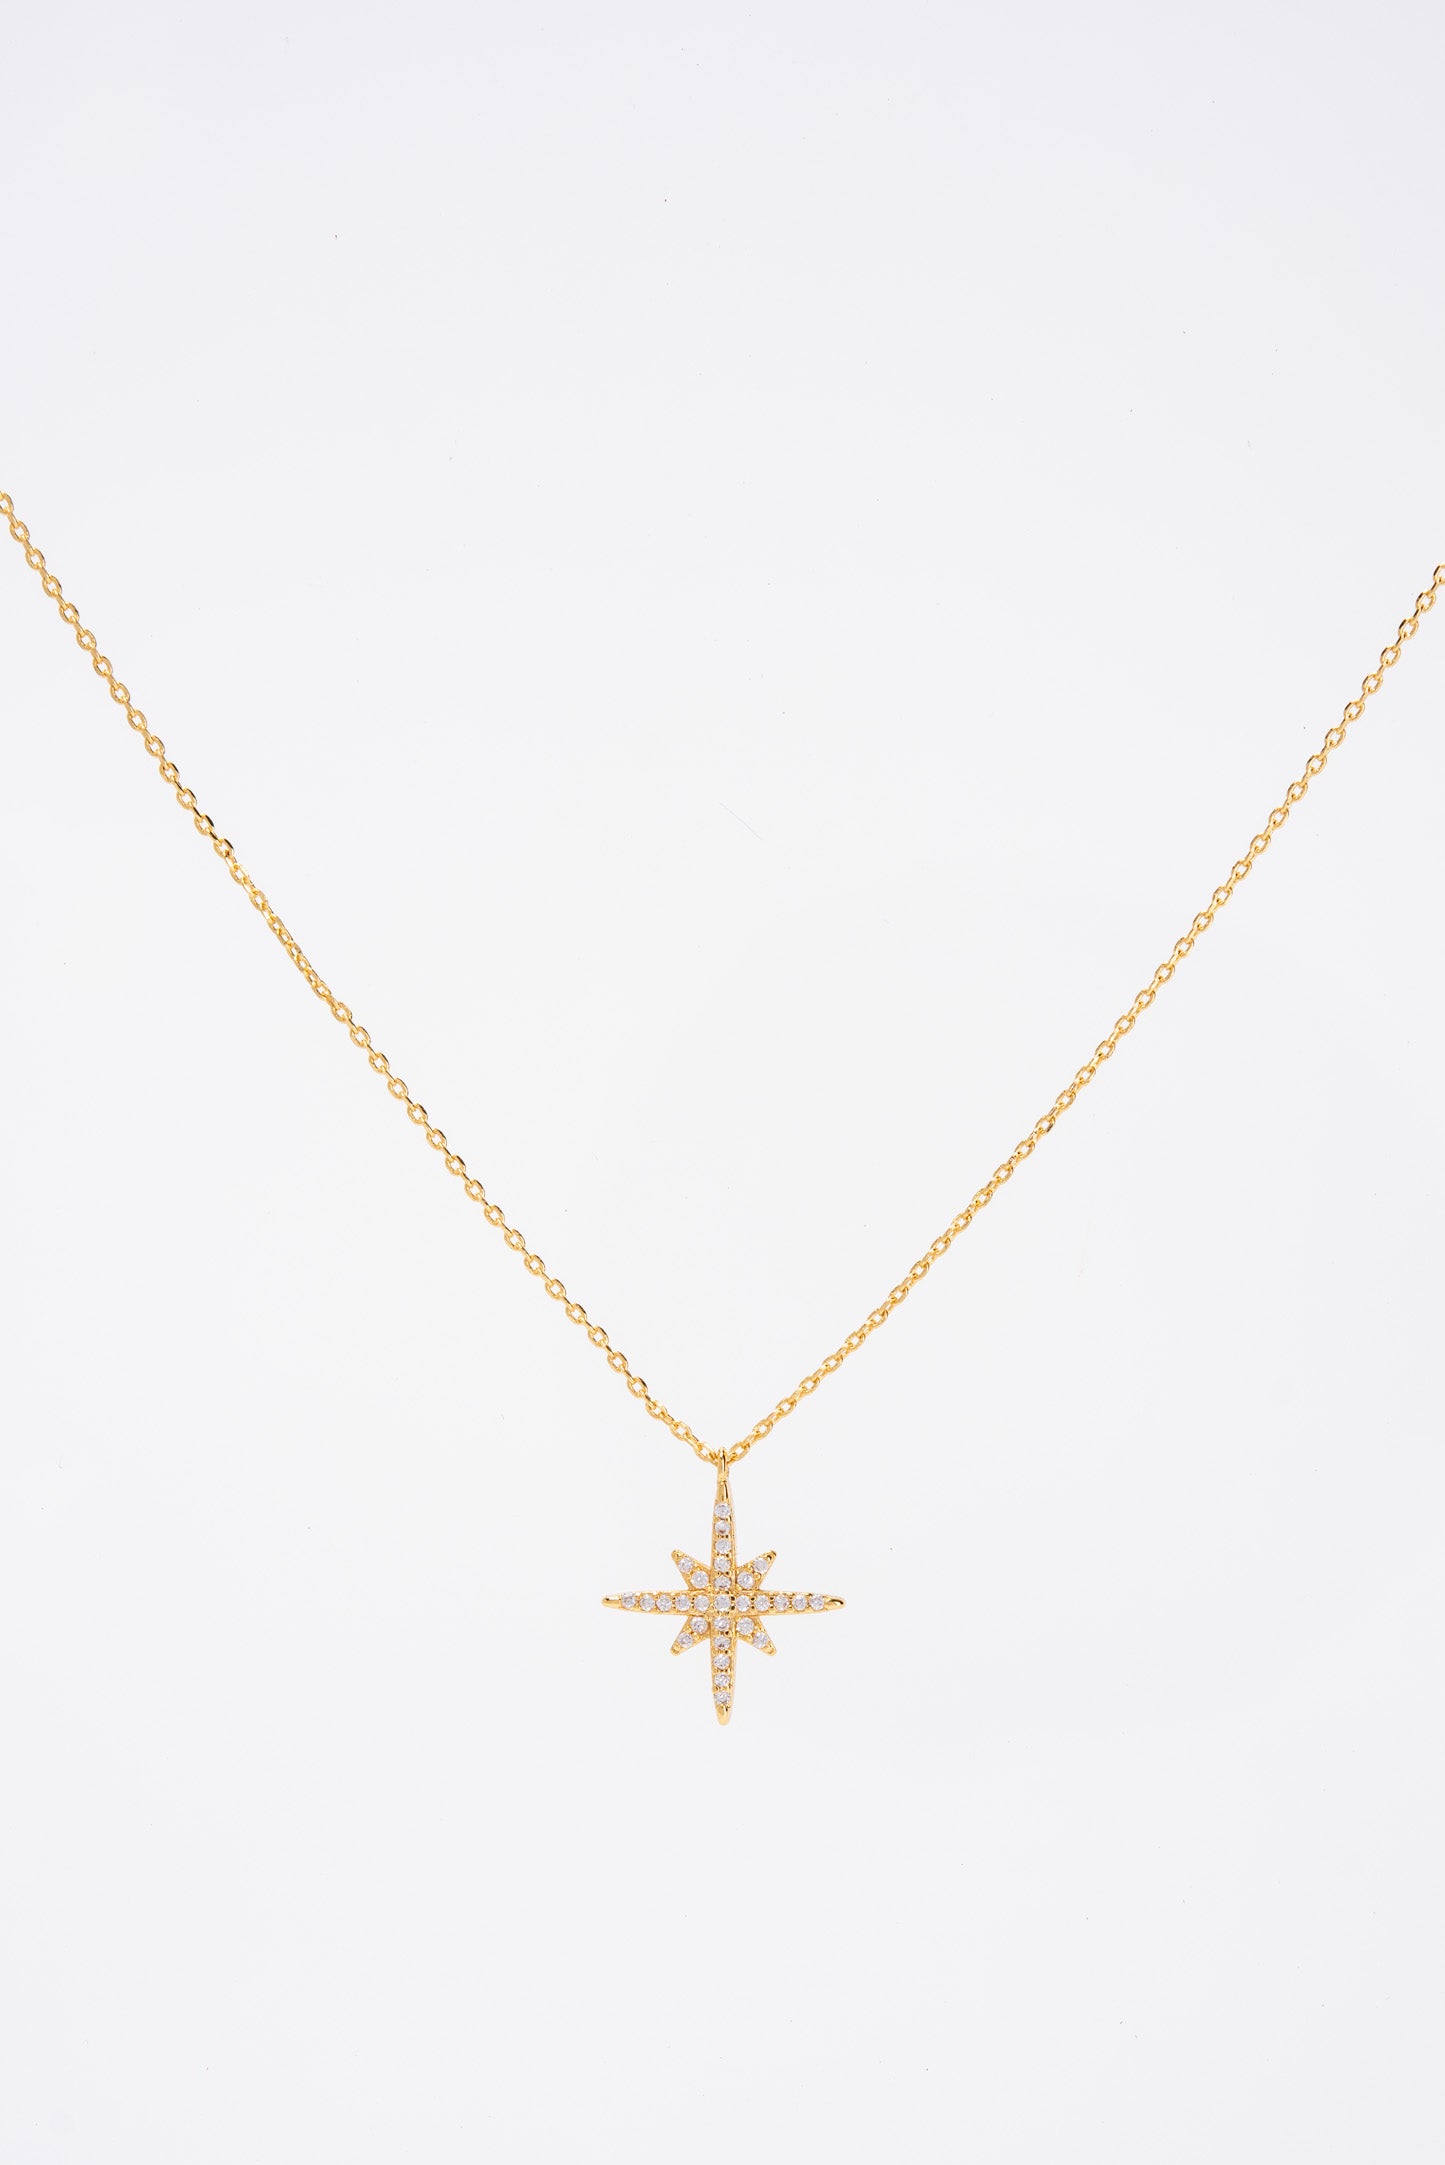 Isla 15 in Gold Plated CZ Star Pendant Necklace - Gold